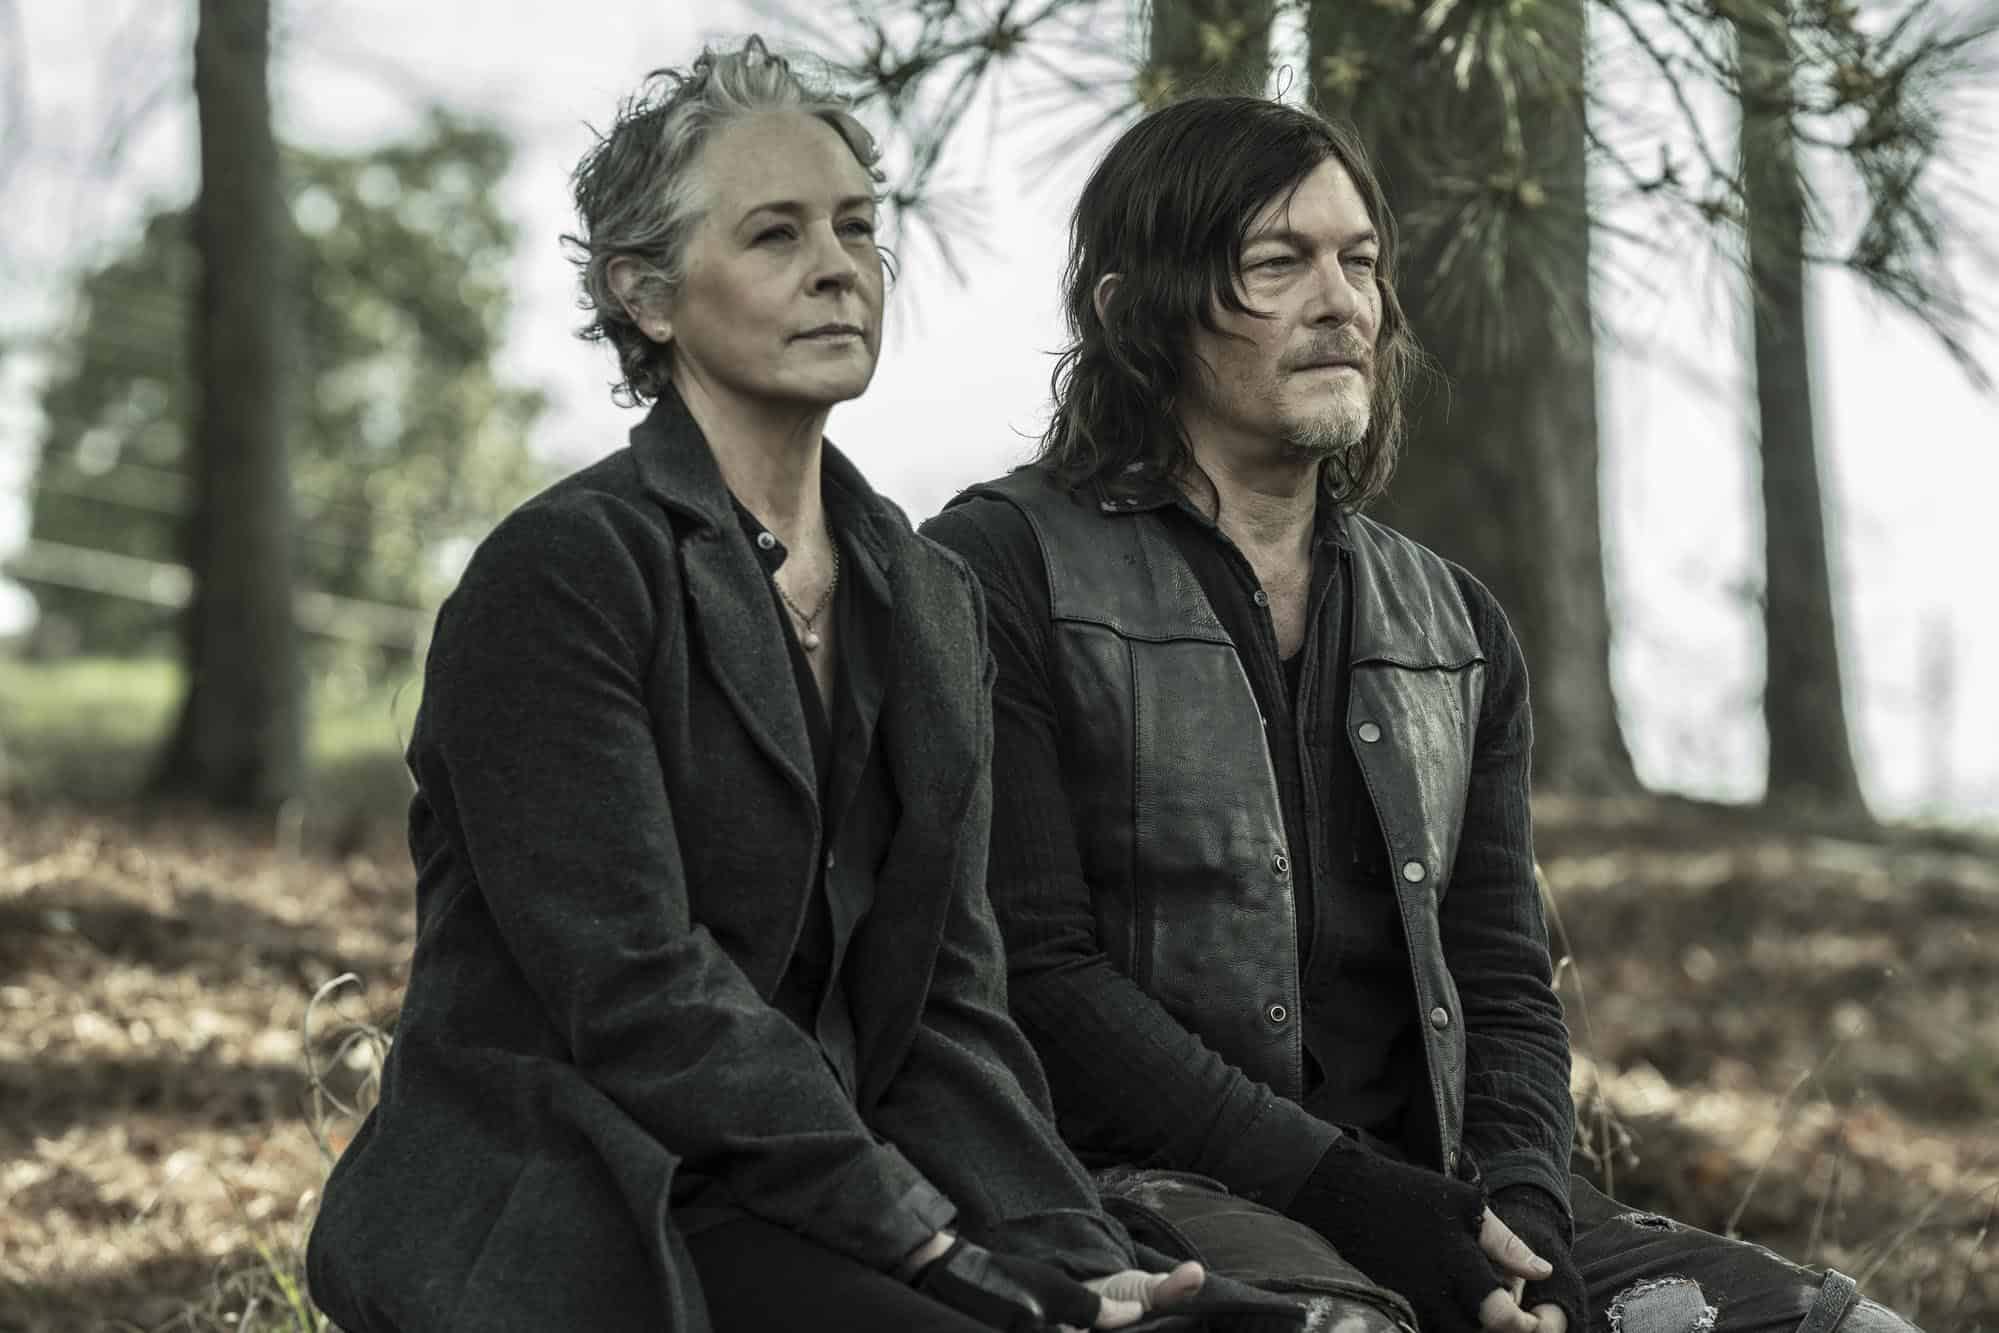 Daryl and Carol sharing an emotional converstion during the finale episode of the show, The Walking Dead (Credits: AMC)